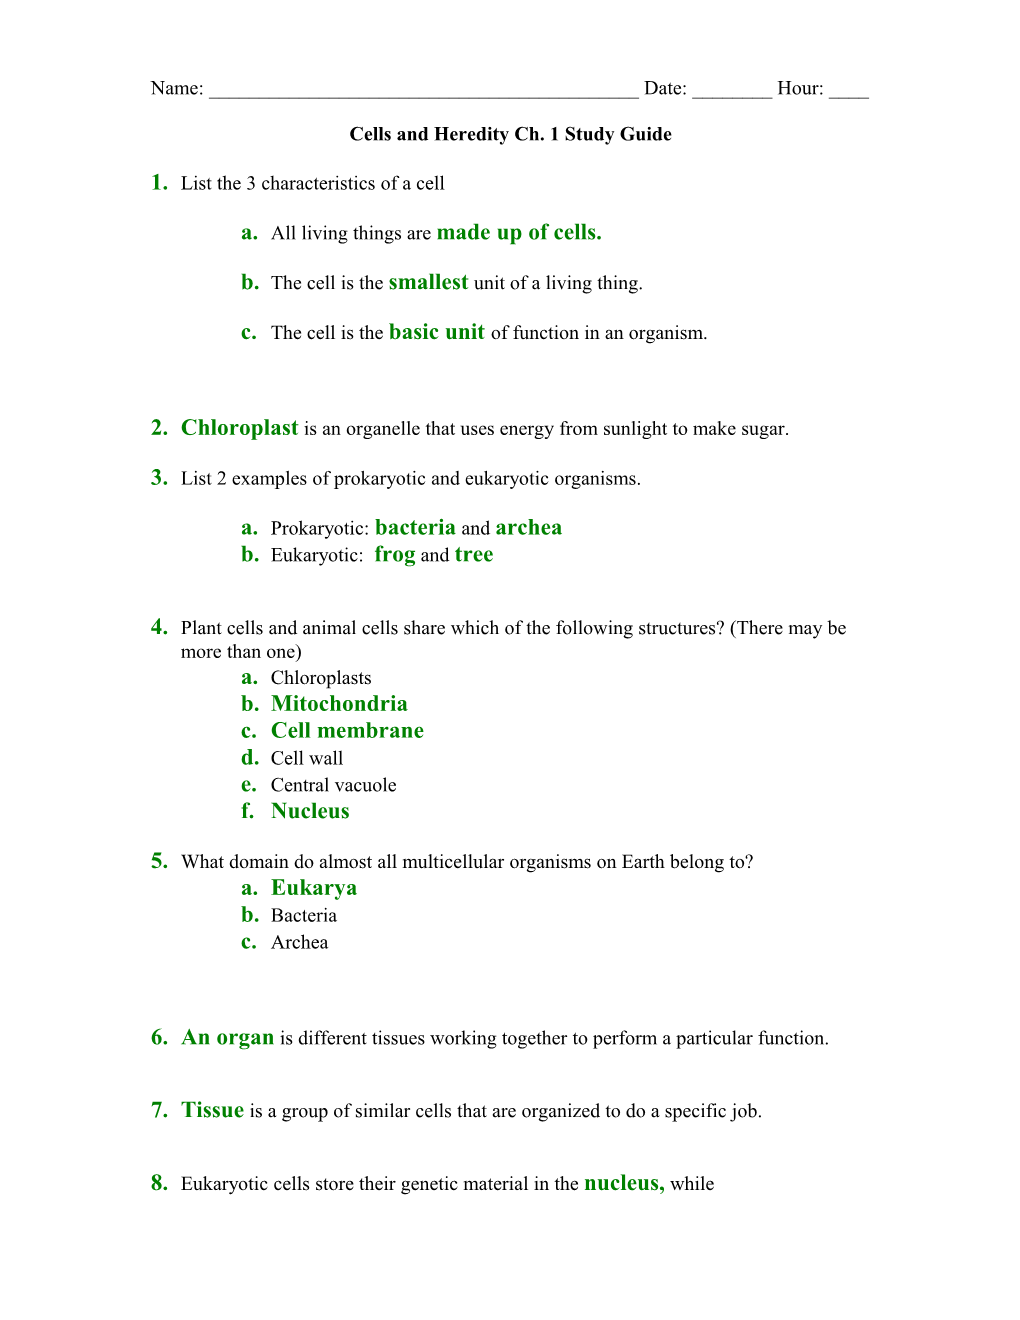 Cells and Heredity Ch. 1 Study Guide